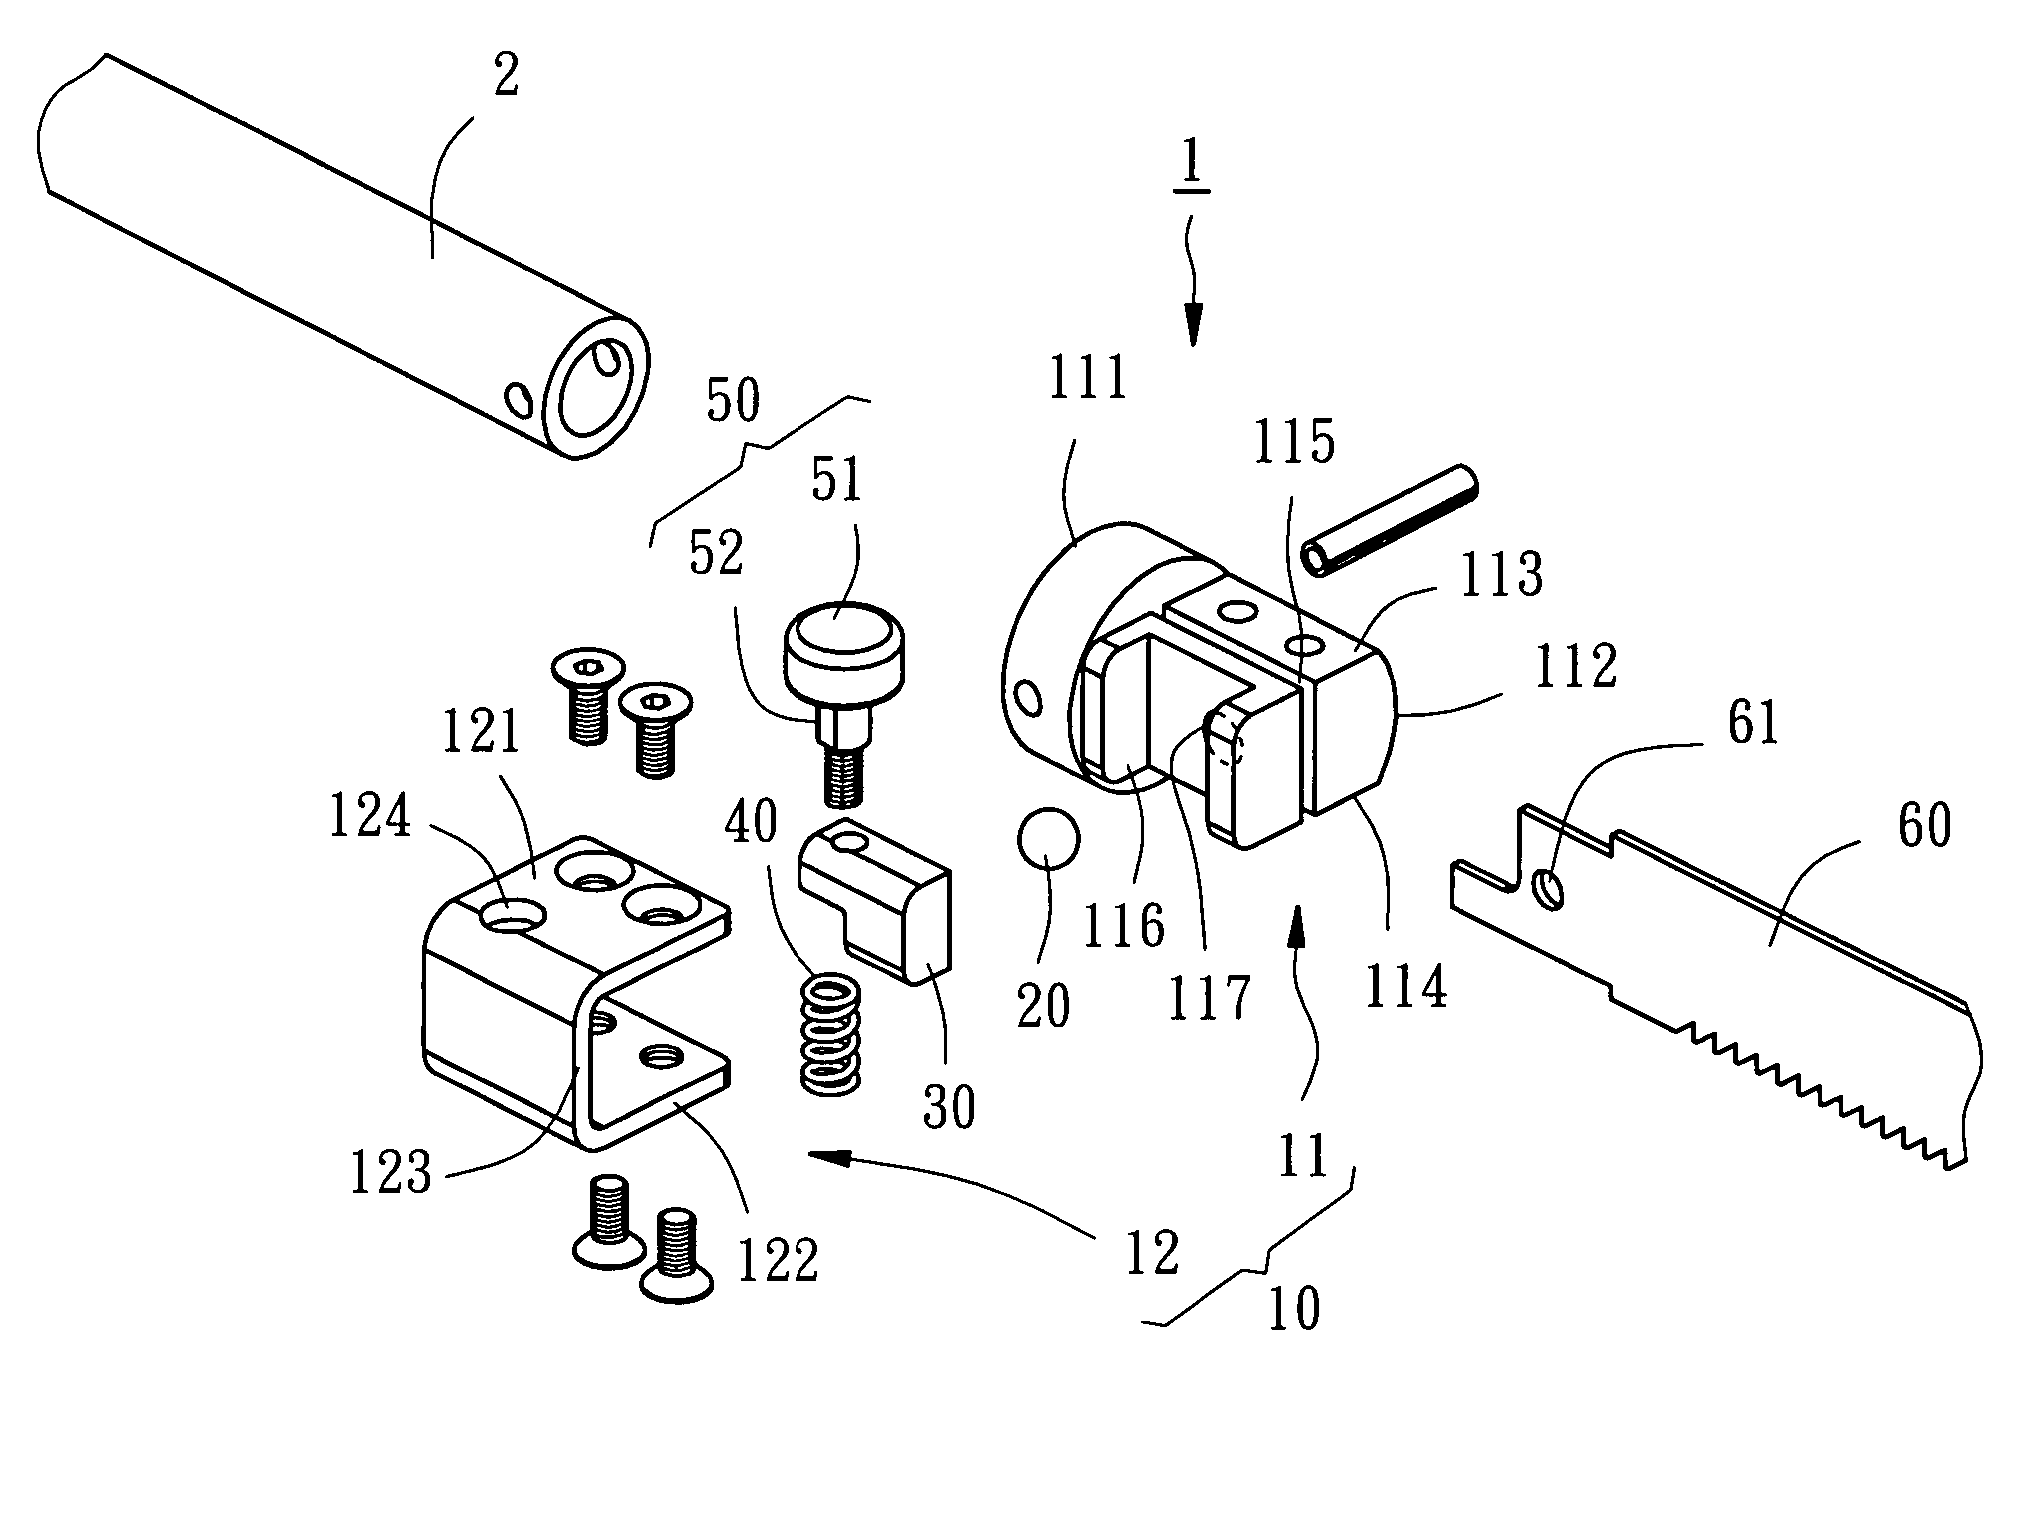 Saw blade clamping mechanism for a power tool